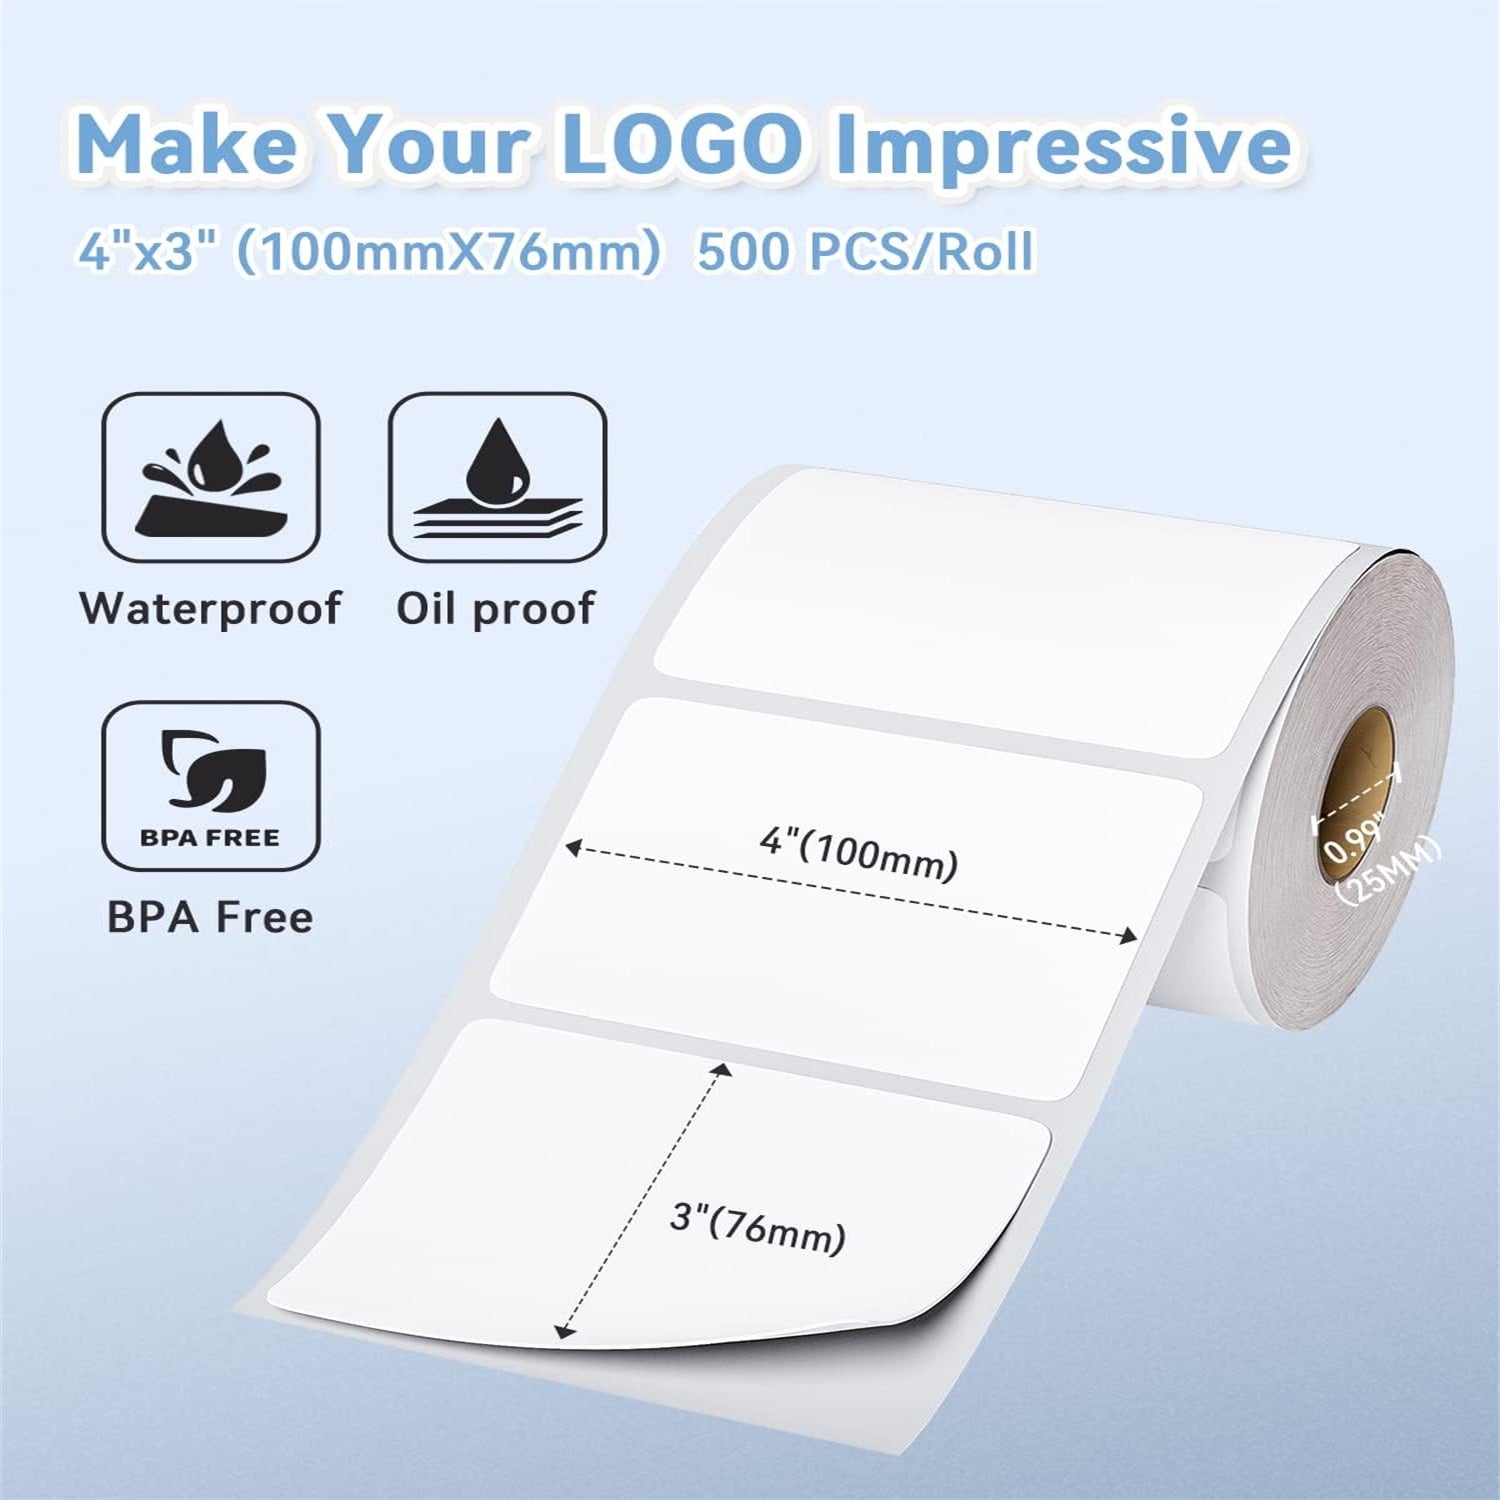 Phomemo 4"x3" White Thermal Label For Shipping Label Printer